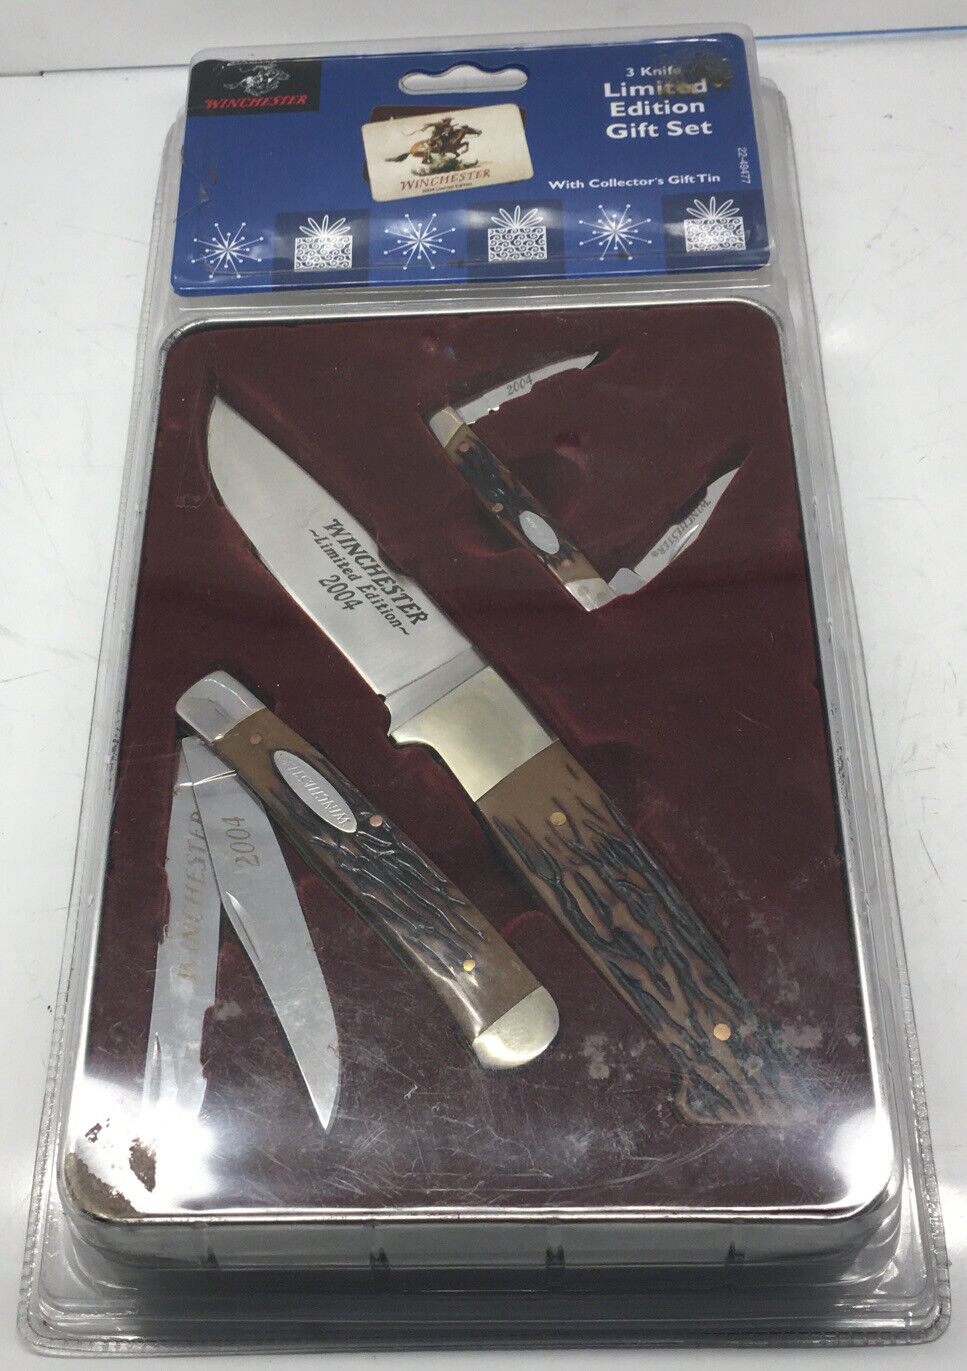 2004 WINCHESTER 3 KNIFE LIMITED ED GIFT SET WITH COLLECTOR TIN